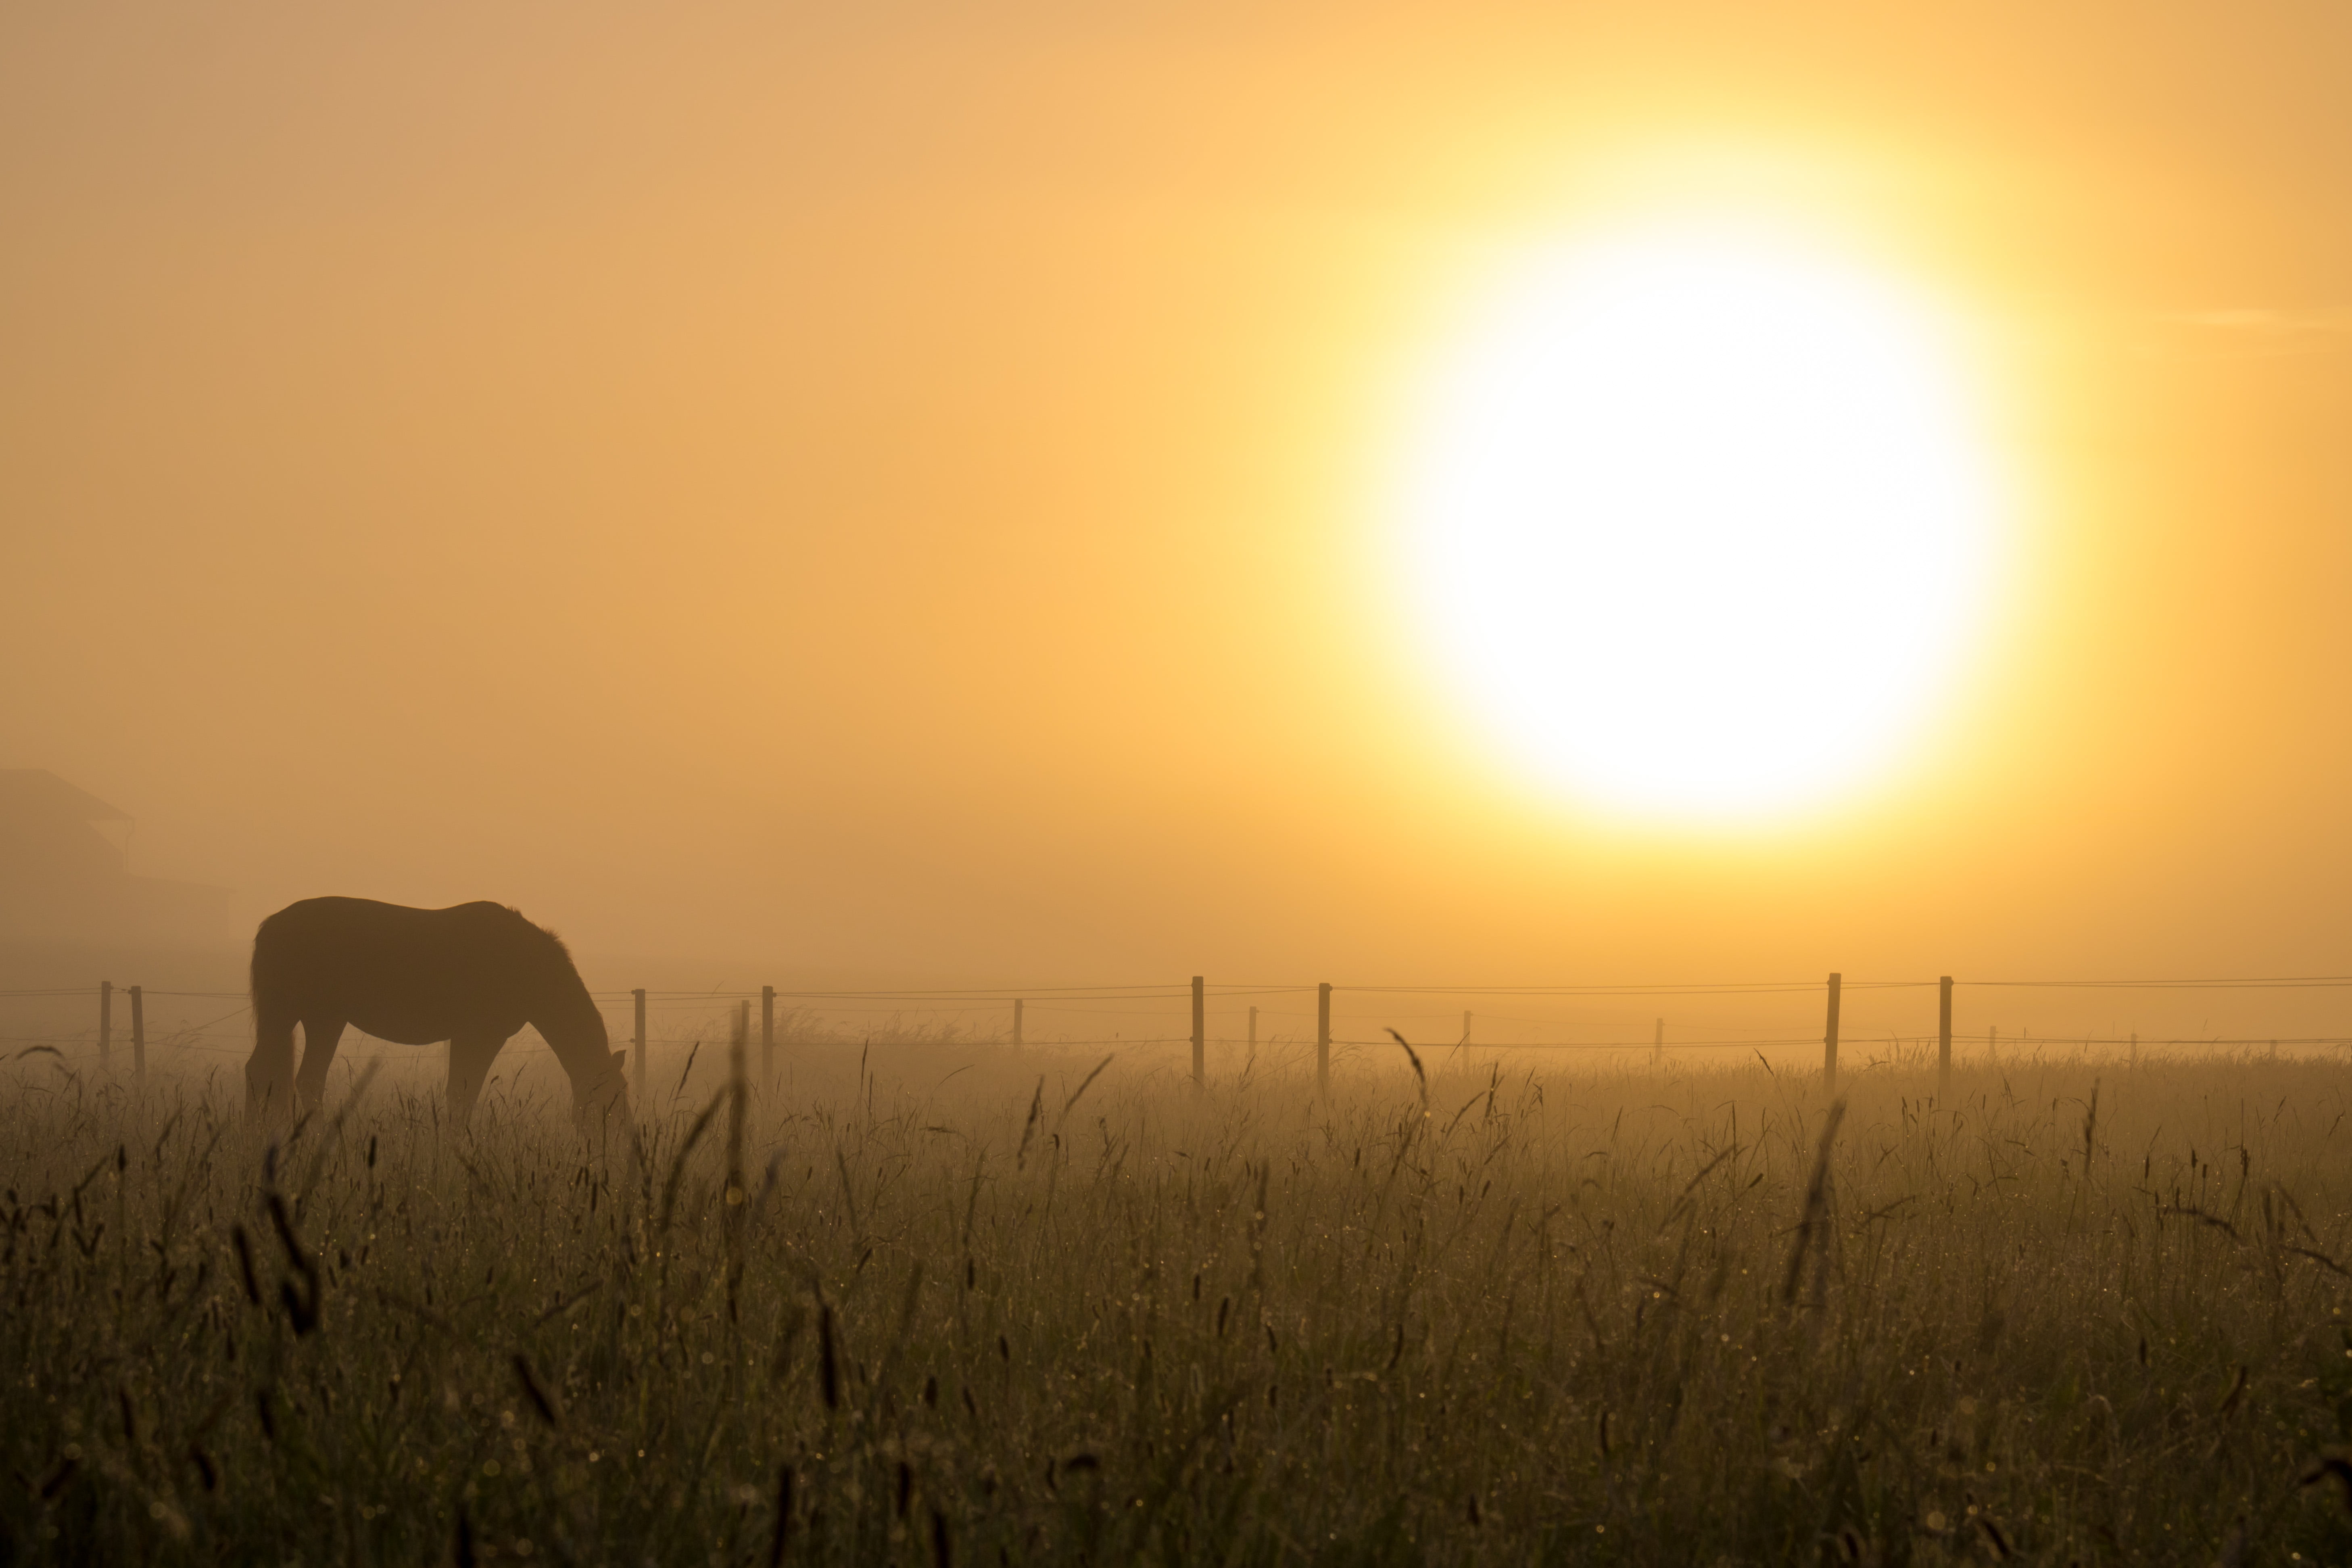 photo of horse eating on grass fields during golden hour, Mist